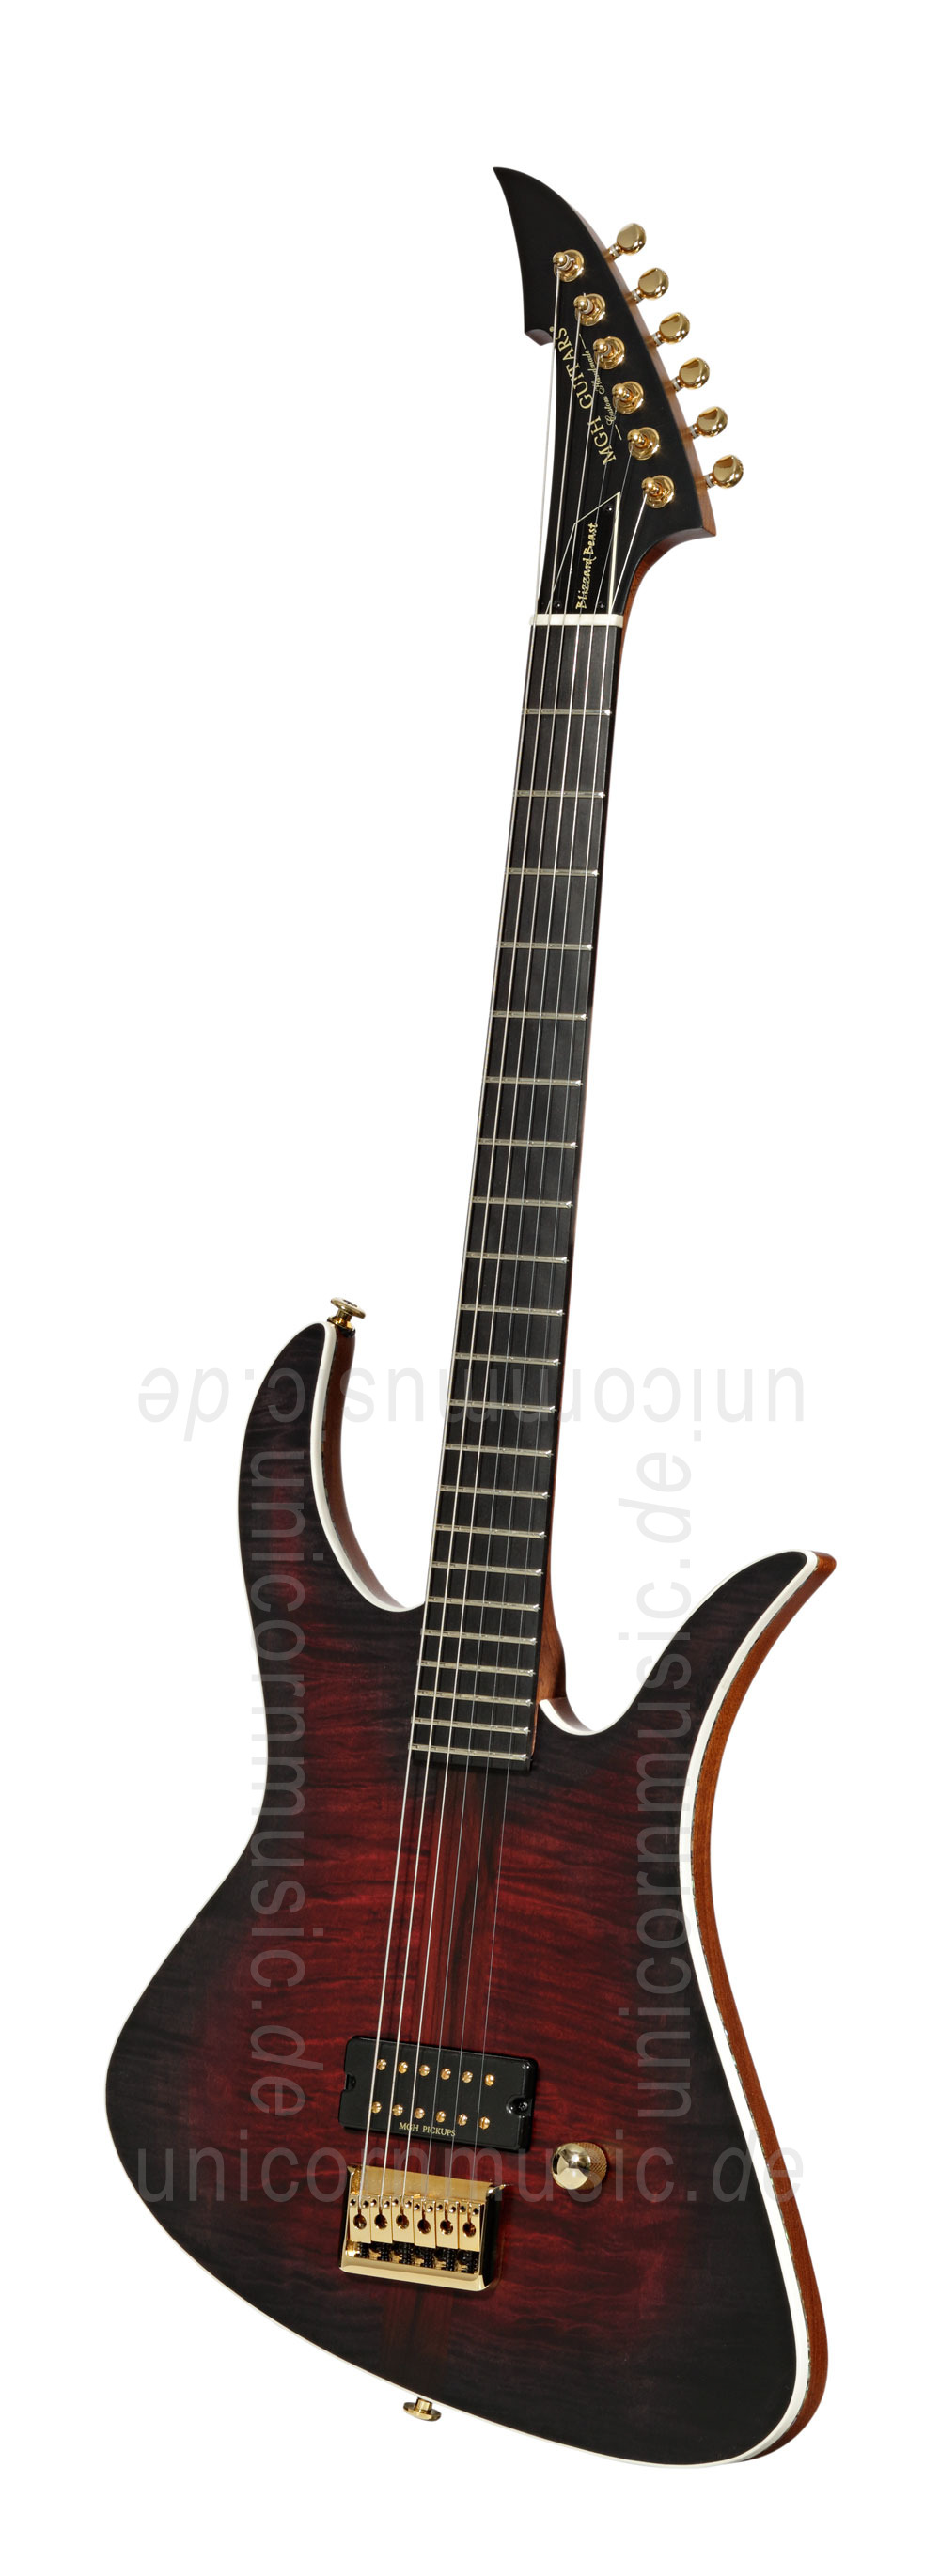 to article description / price Electric MGH GUITARS Blizzard Beast Premium Deluxe - black cherry burst  - made in Germany